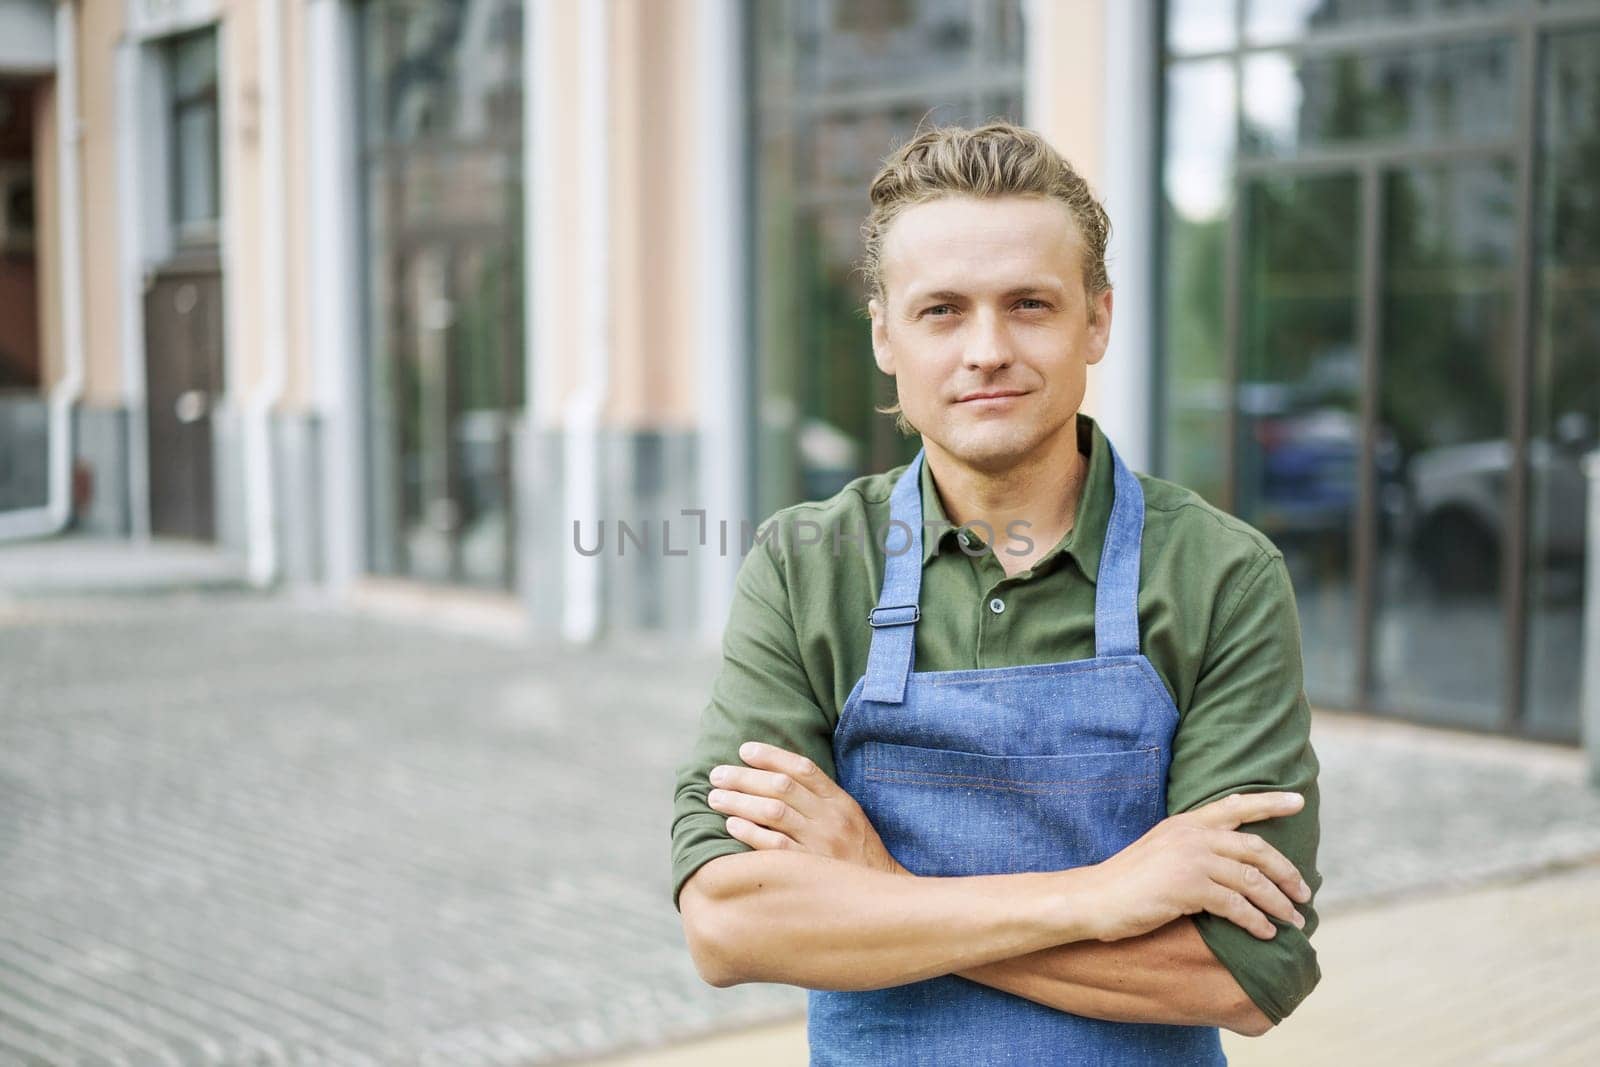 Restaurant or kitchen worker wearing blue apron, standing against backdrop of city. Concept of service and readiness to help. Customer service-oriented nature of the hospitality industry. by LipikStockMedia